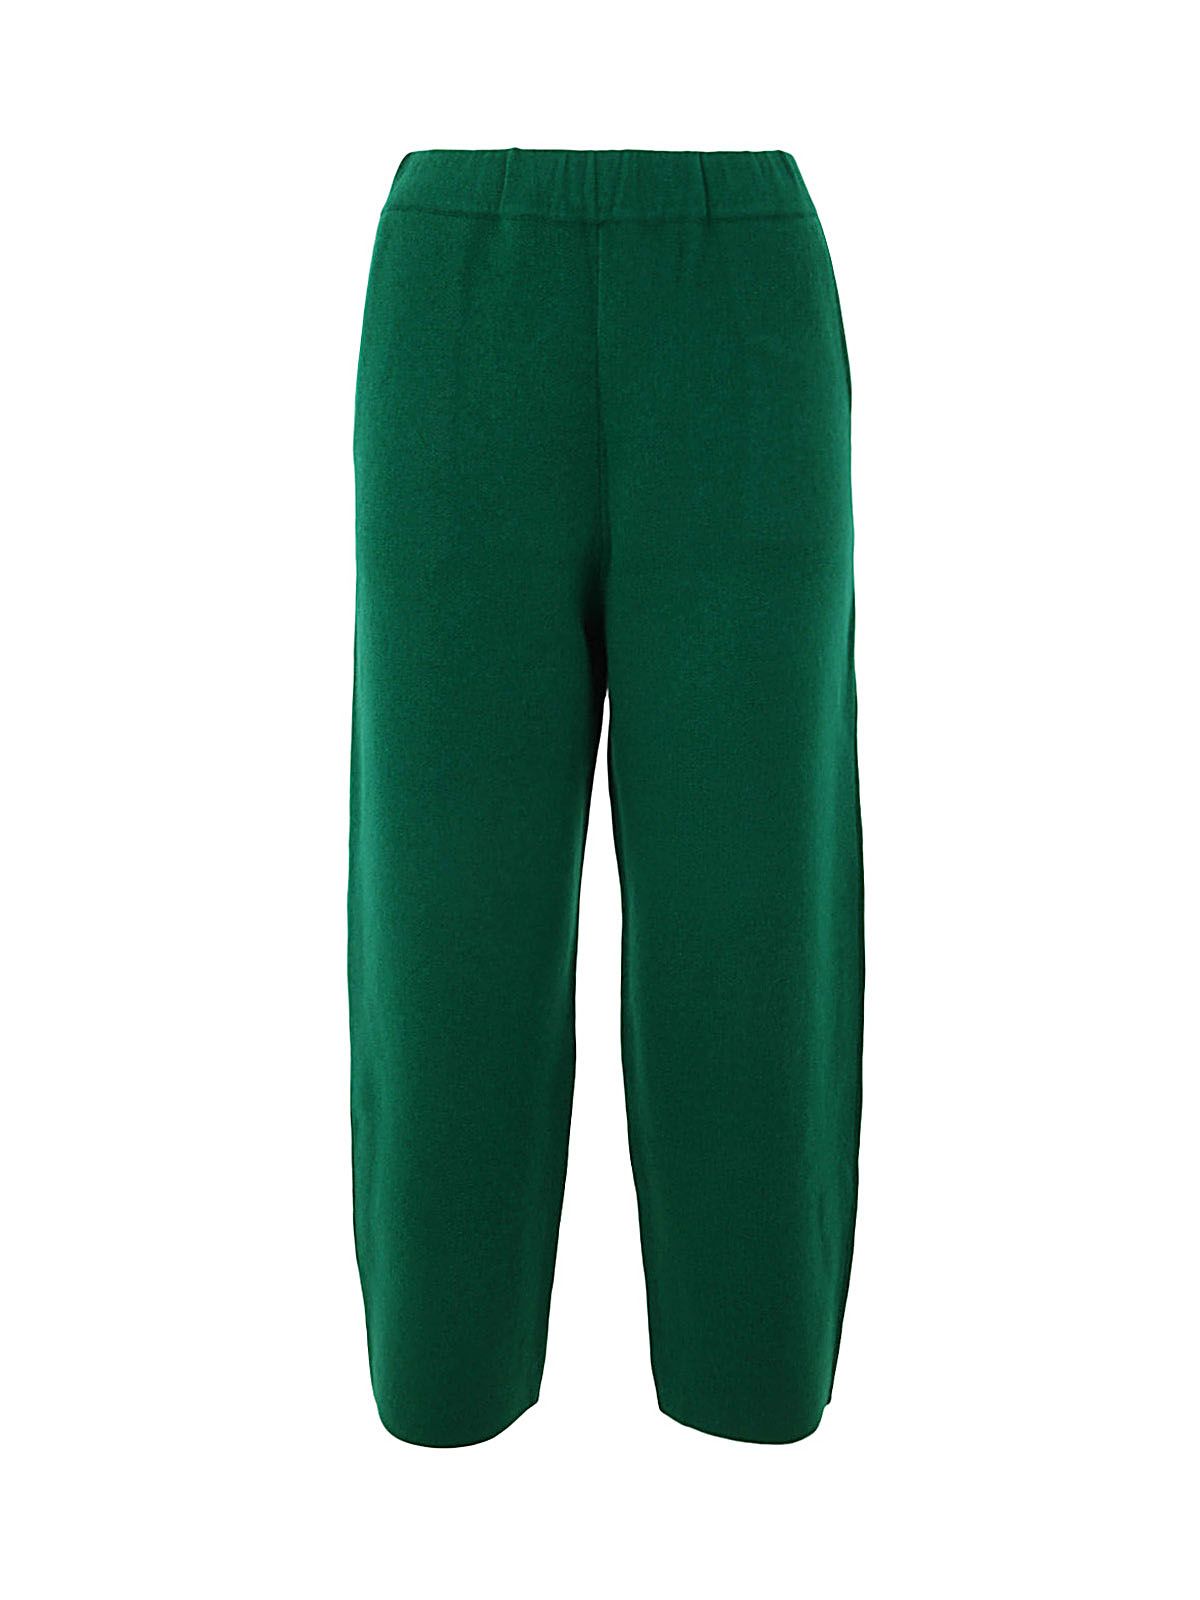 Oyuna Knitted Sculpted Trousers